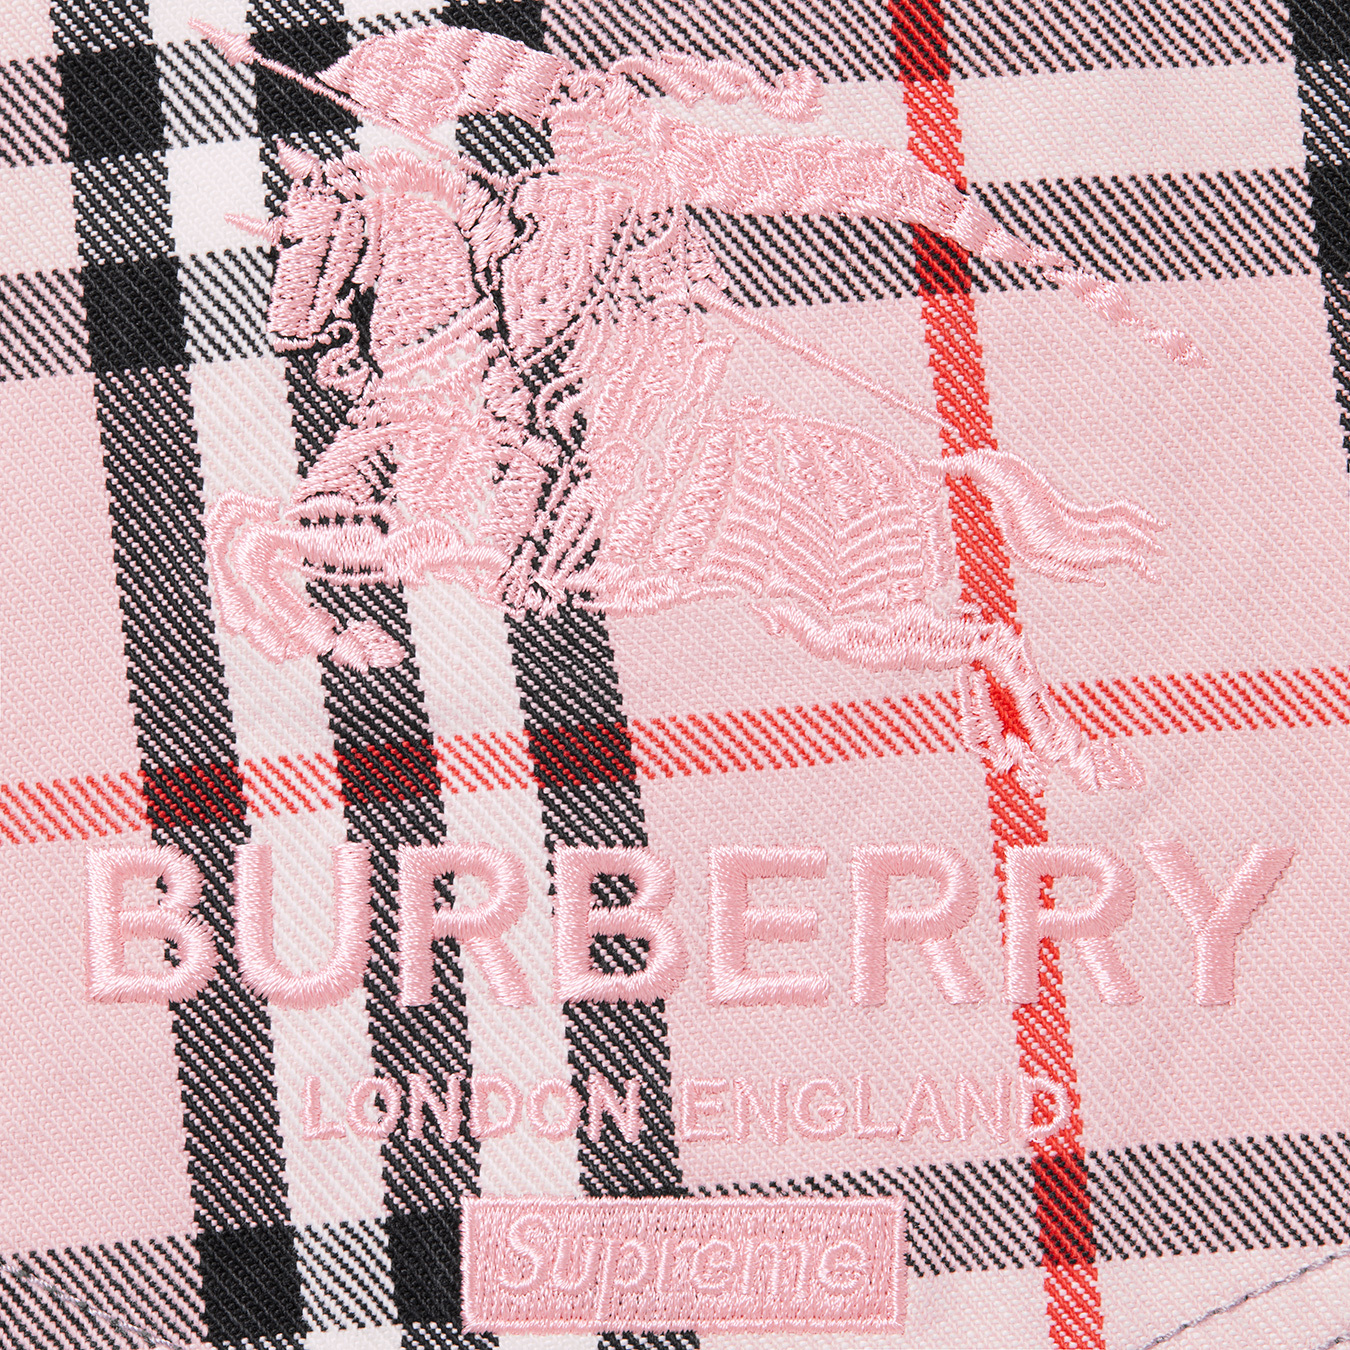 Burberry x Supreme S/S 22 Regular Jeans Trouser pants - Pink Size 32